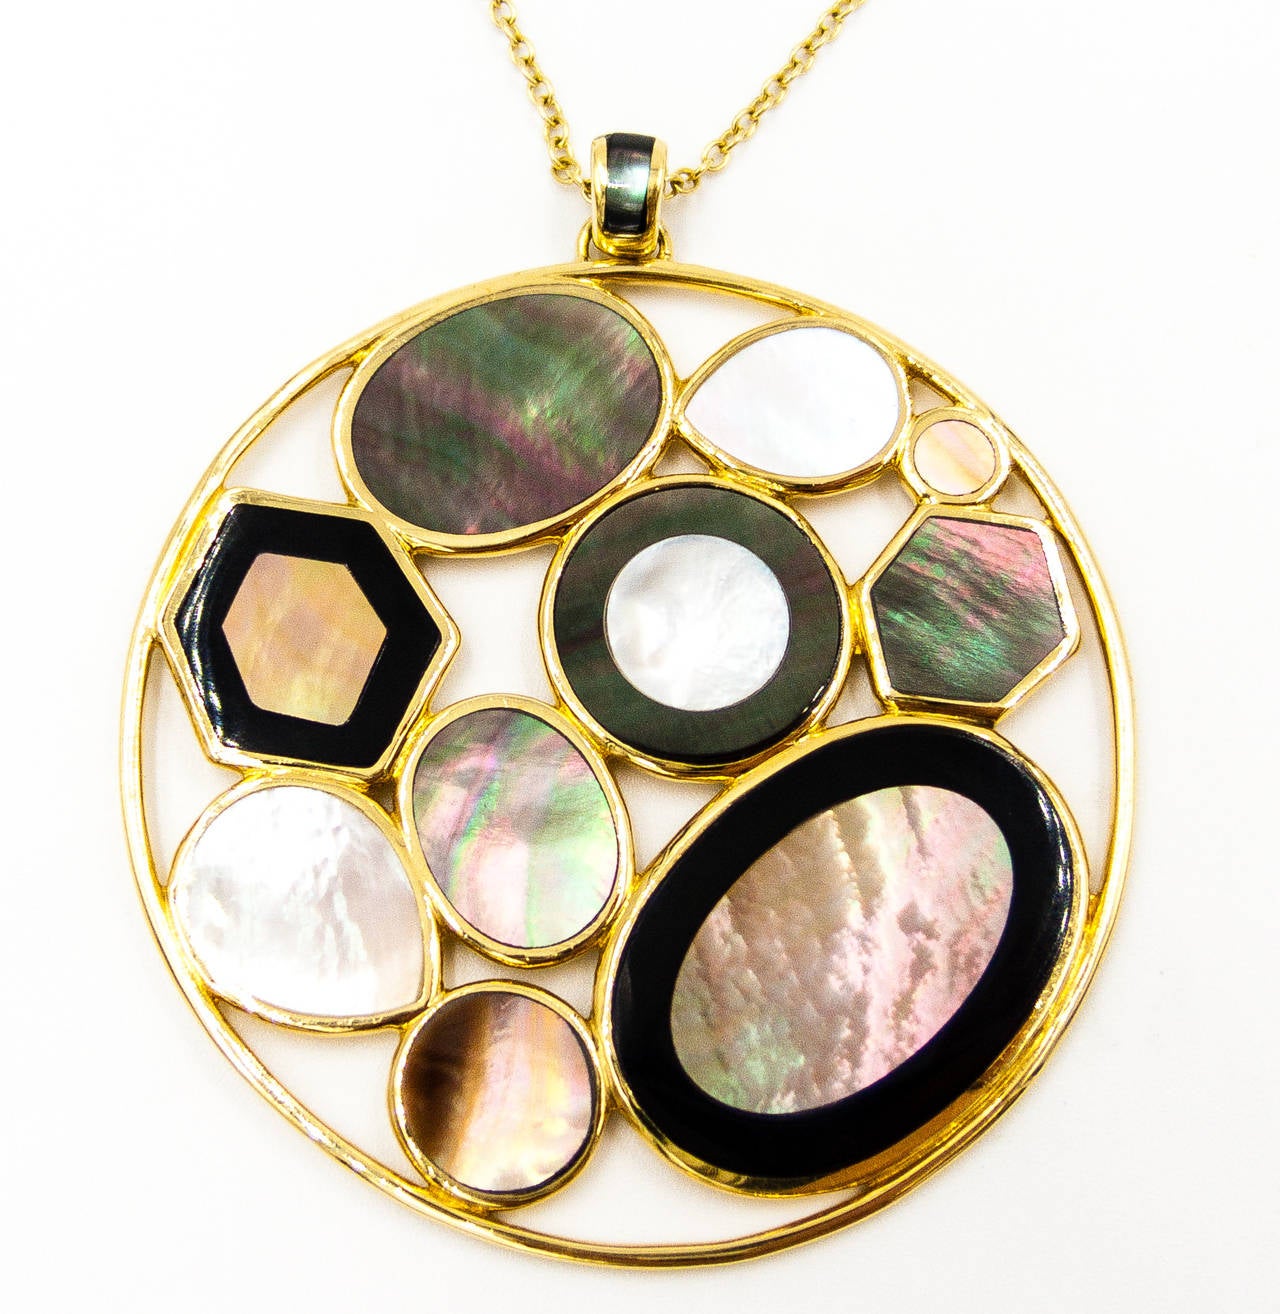 Grey and white mother of pearl set within slashes of black onyx - classic and cleanly geometric, but with Ippolita style.  The pendant itself is 2 inches across, and the chain is of warm and highly polished 18 karat yellow gold - 36 inches in